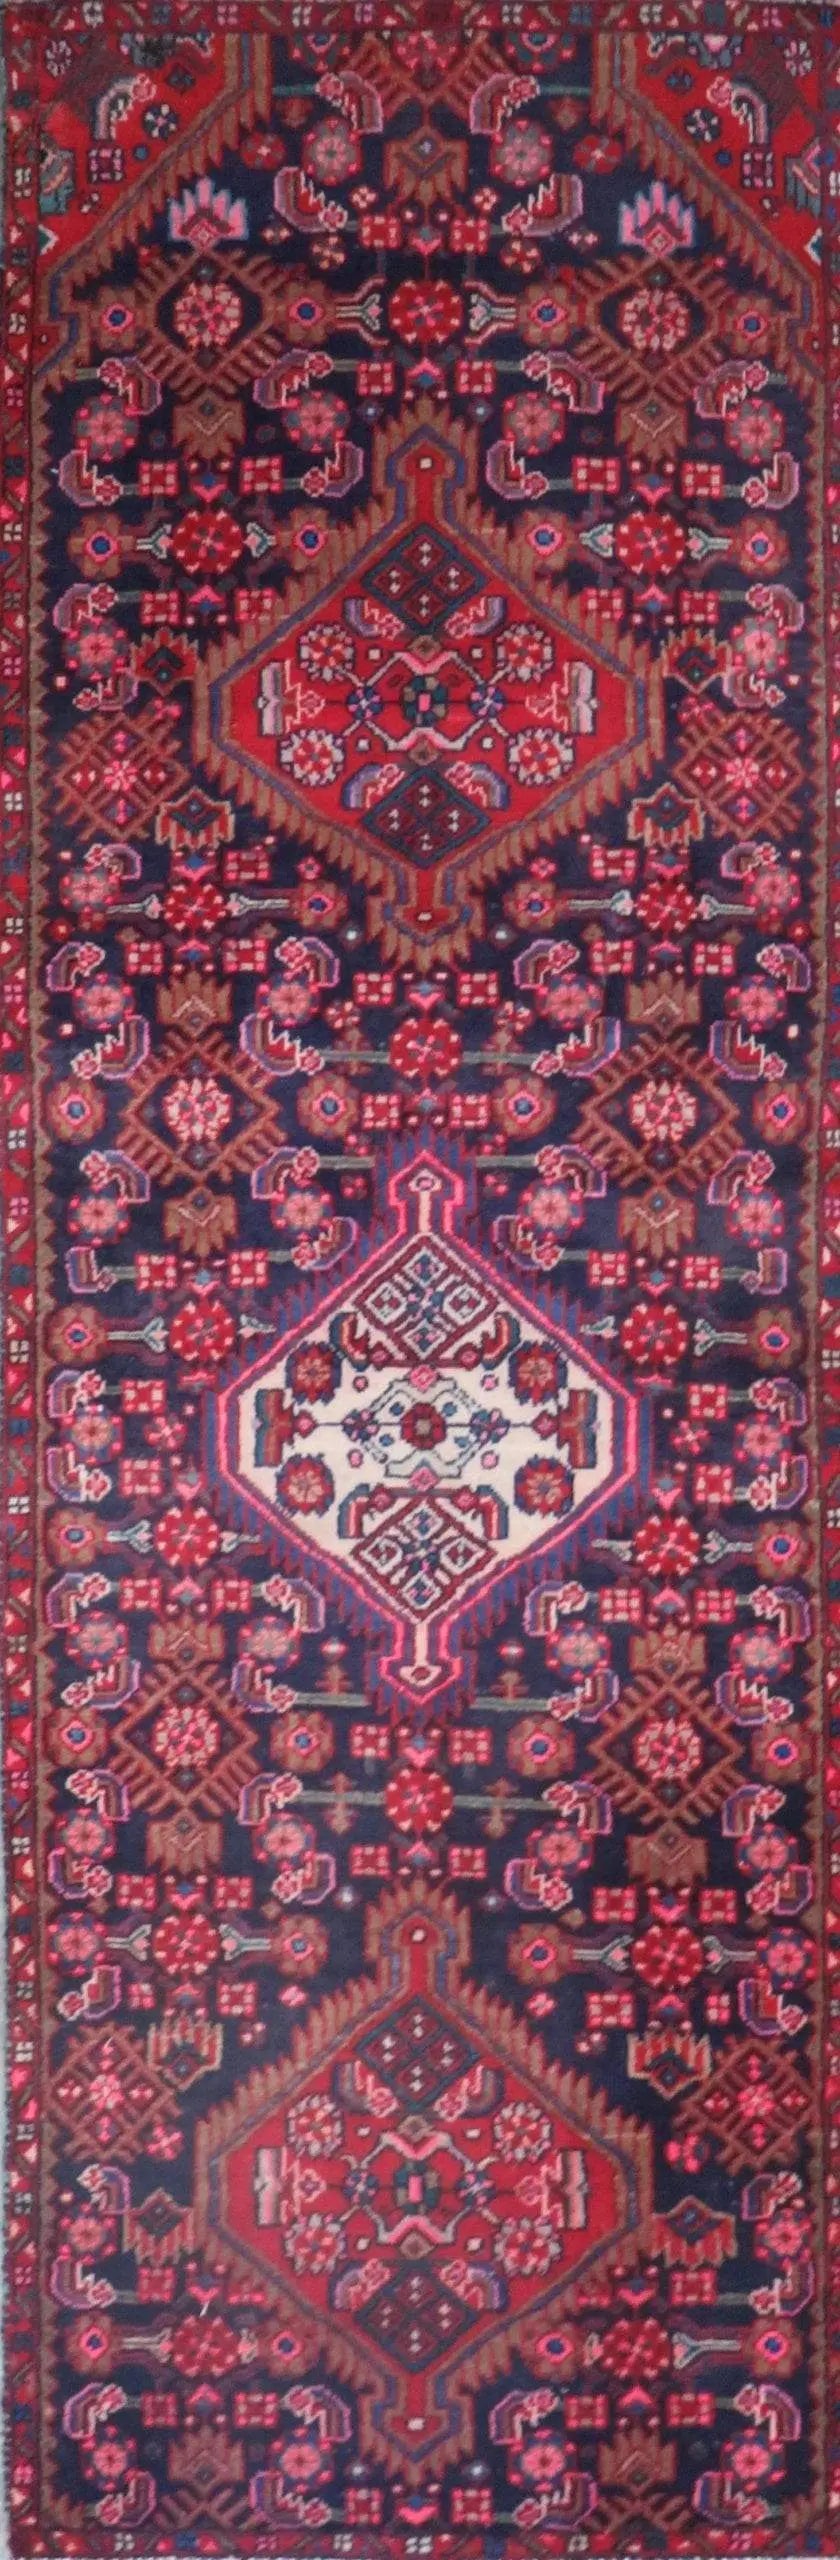 Hand-Knotted Persian Wool Rug _ Luxurious Vintage Design, 8'1" x 2'6", Artisan Crafted